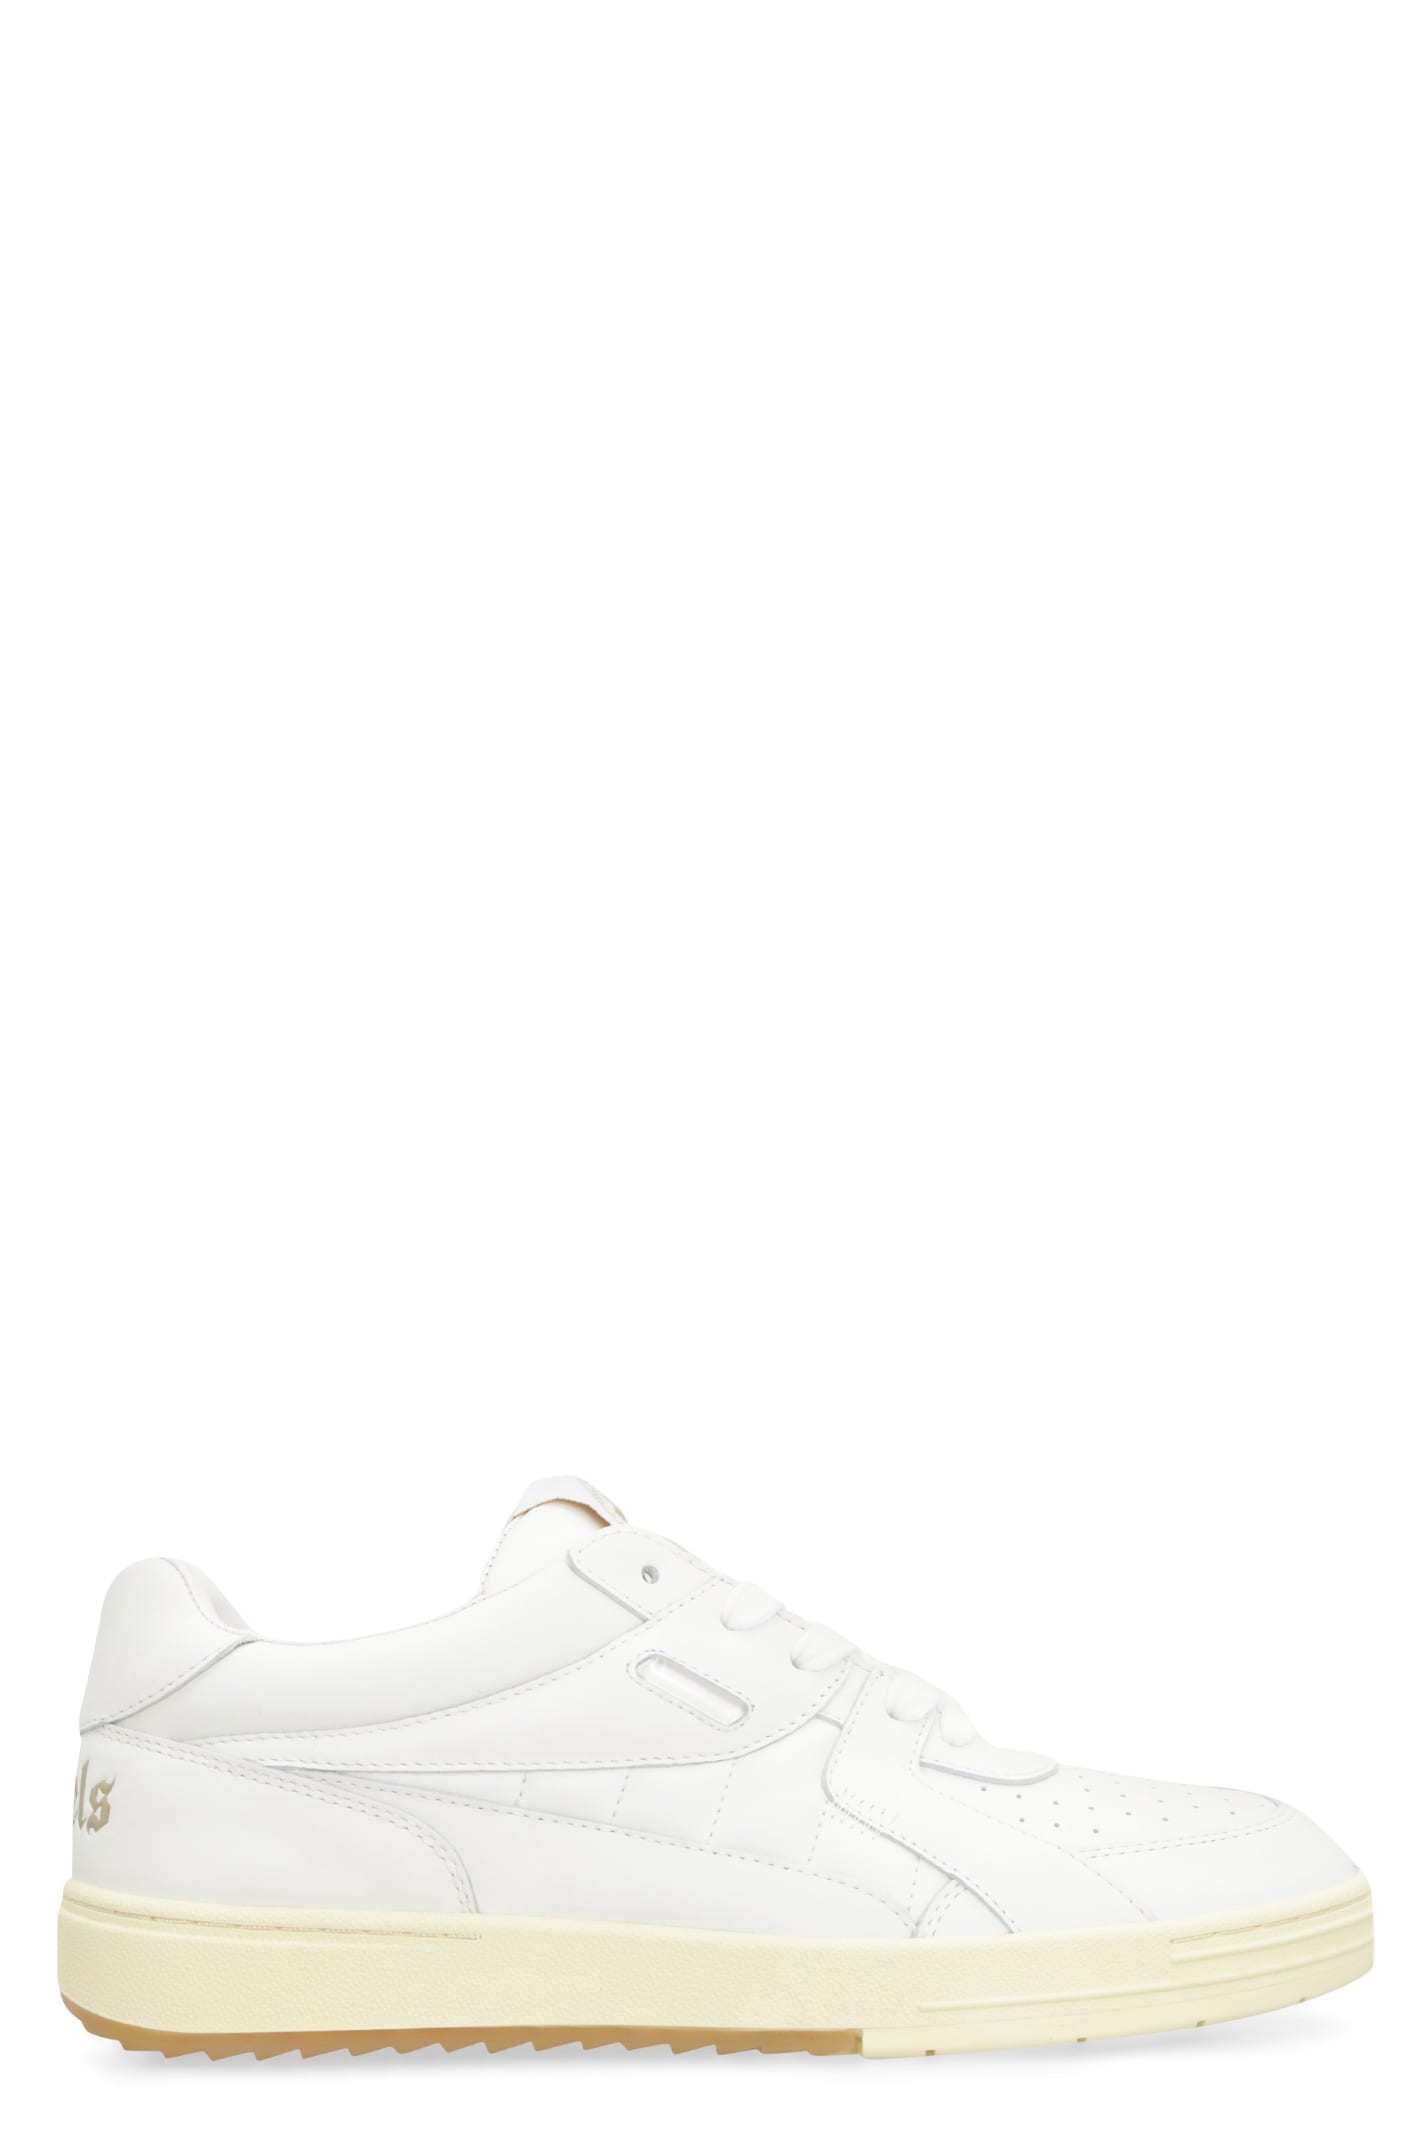 Palm Angels University Low-top Trainers In White